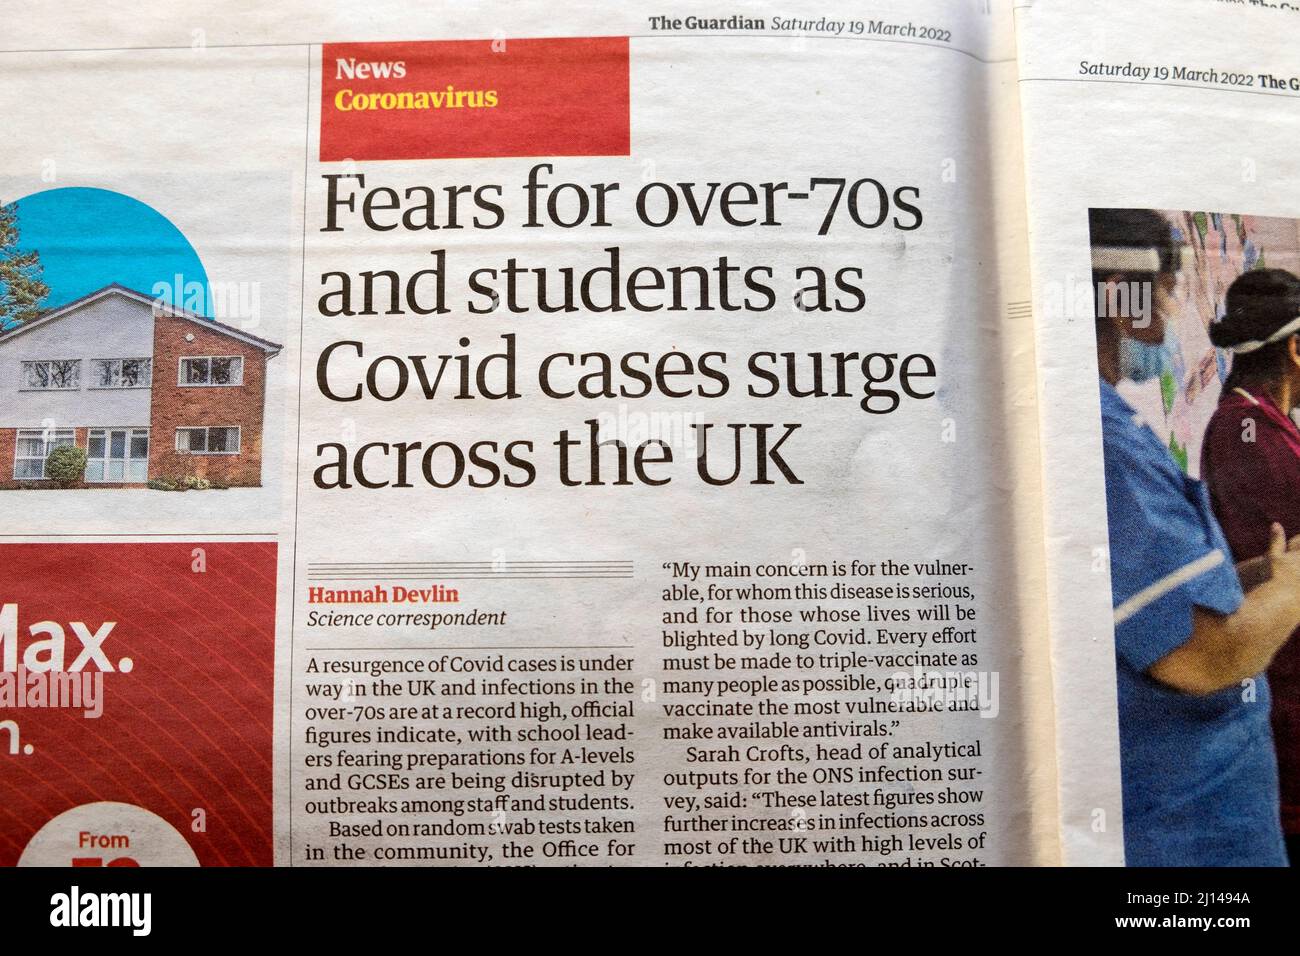 'Fears for over 70s and students as Covid cases surge across the UK' Coronavirus Guardian newspaper headline19 March 2022 London England Great Britain Stock Photo